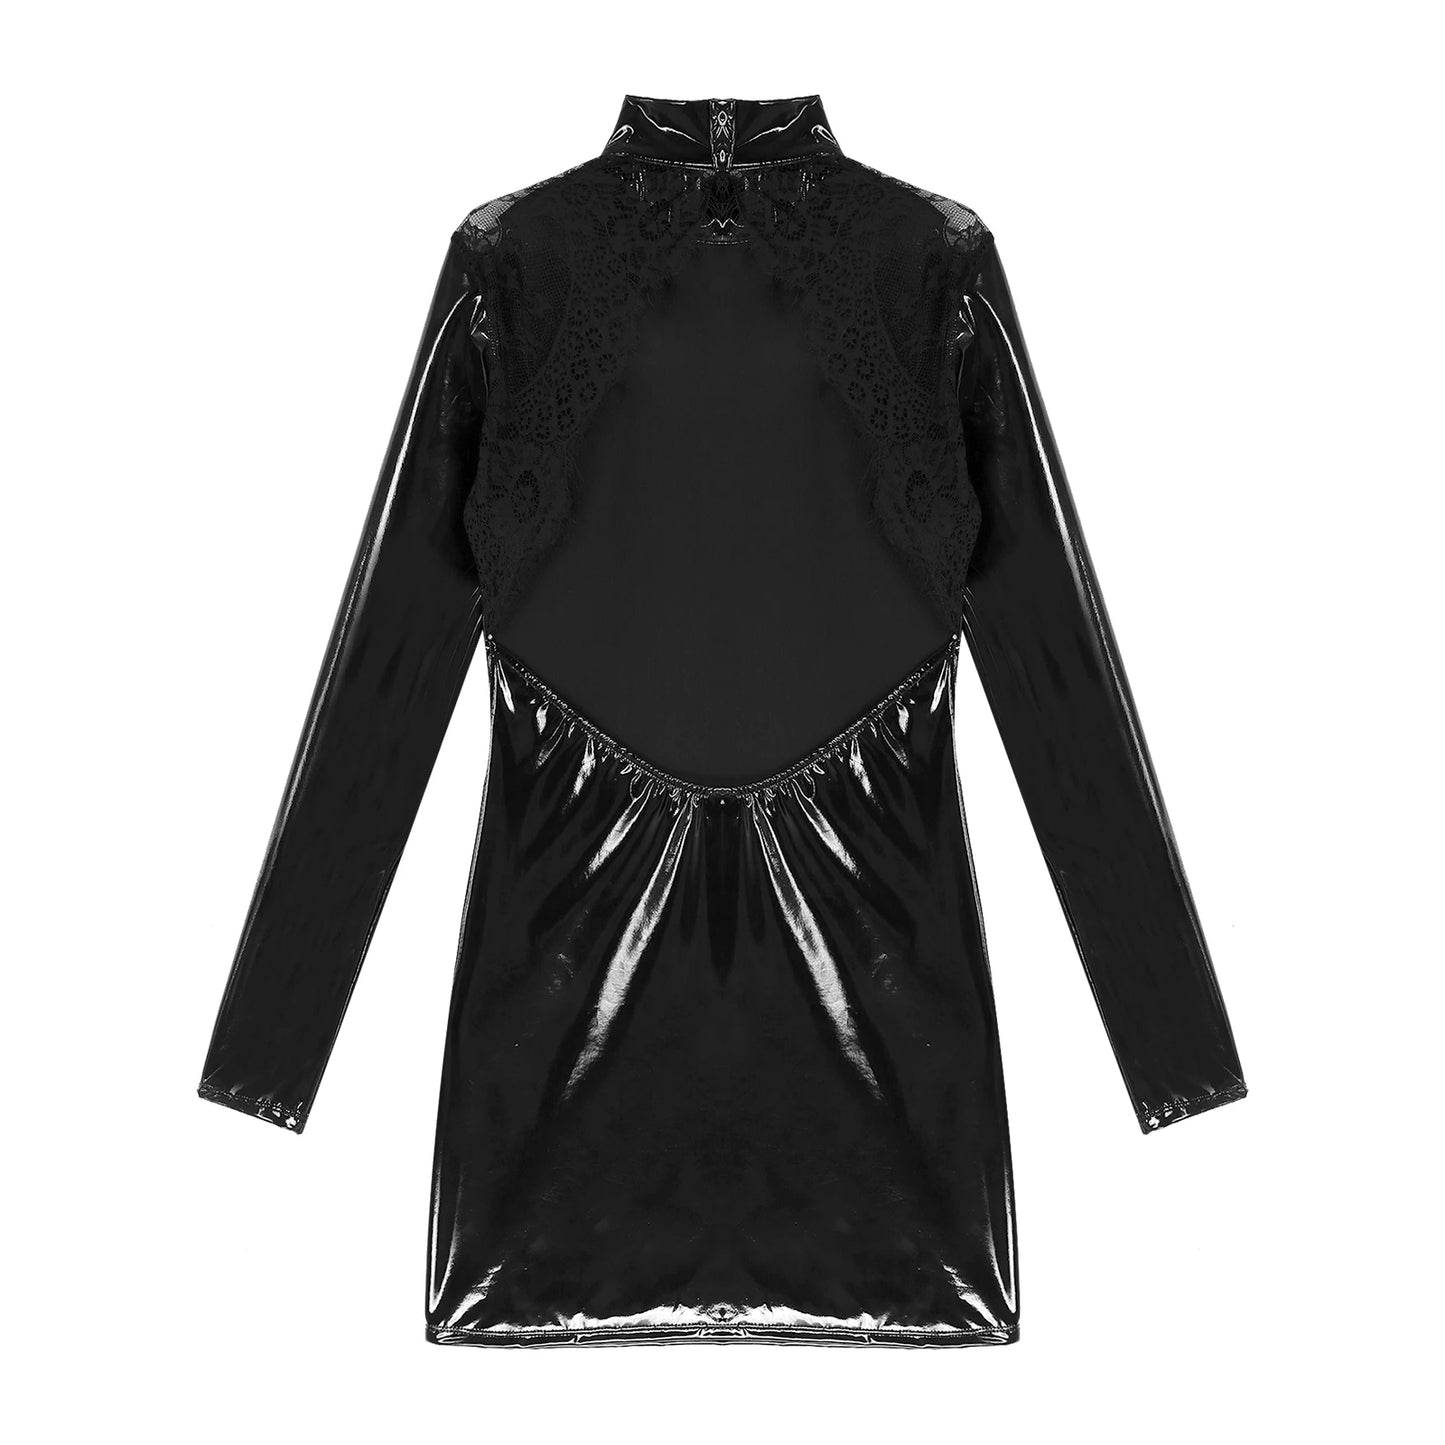 Women Latex Clubwear for Nightclub Party Dance Lace Backless Long Sleeve Dress Wetlook Patent Leather Mock Neck Bodycon Dresses